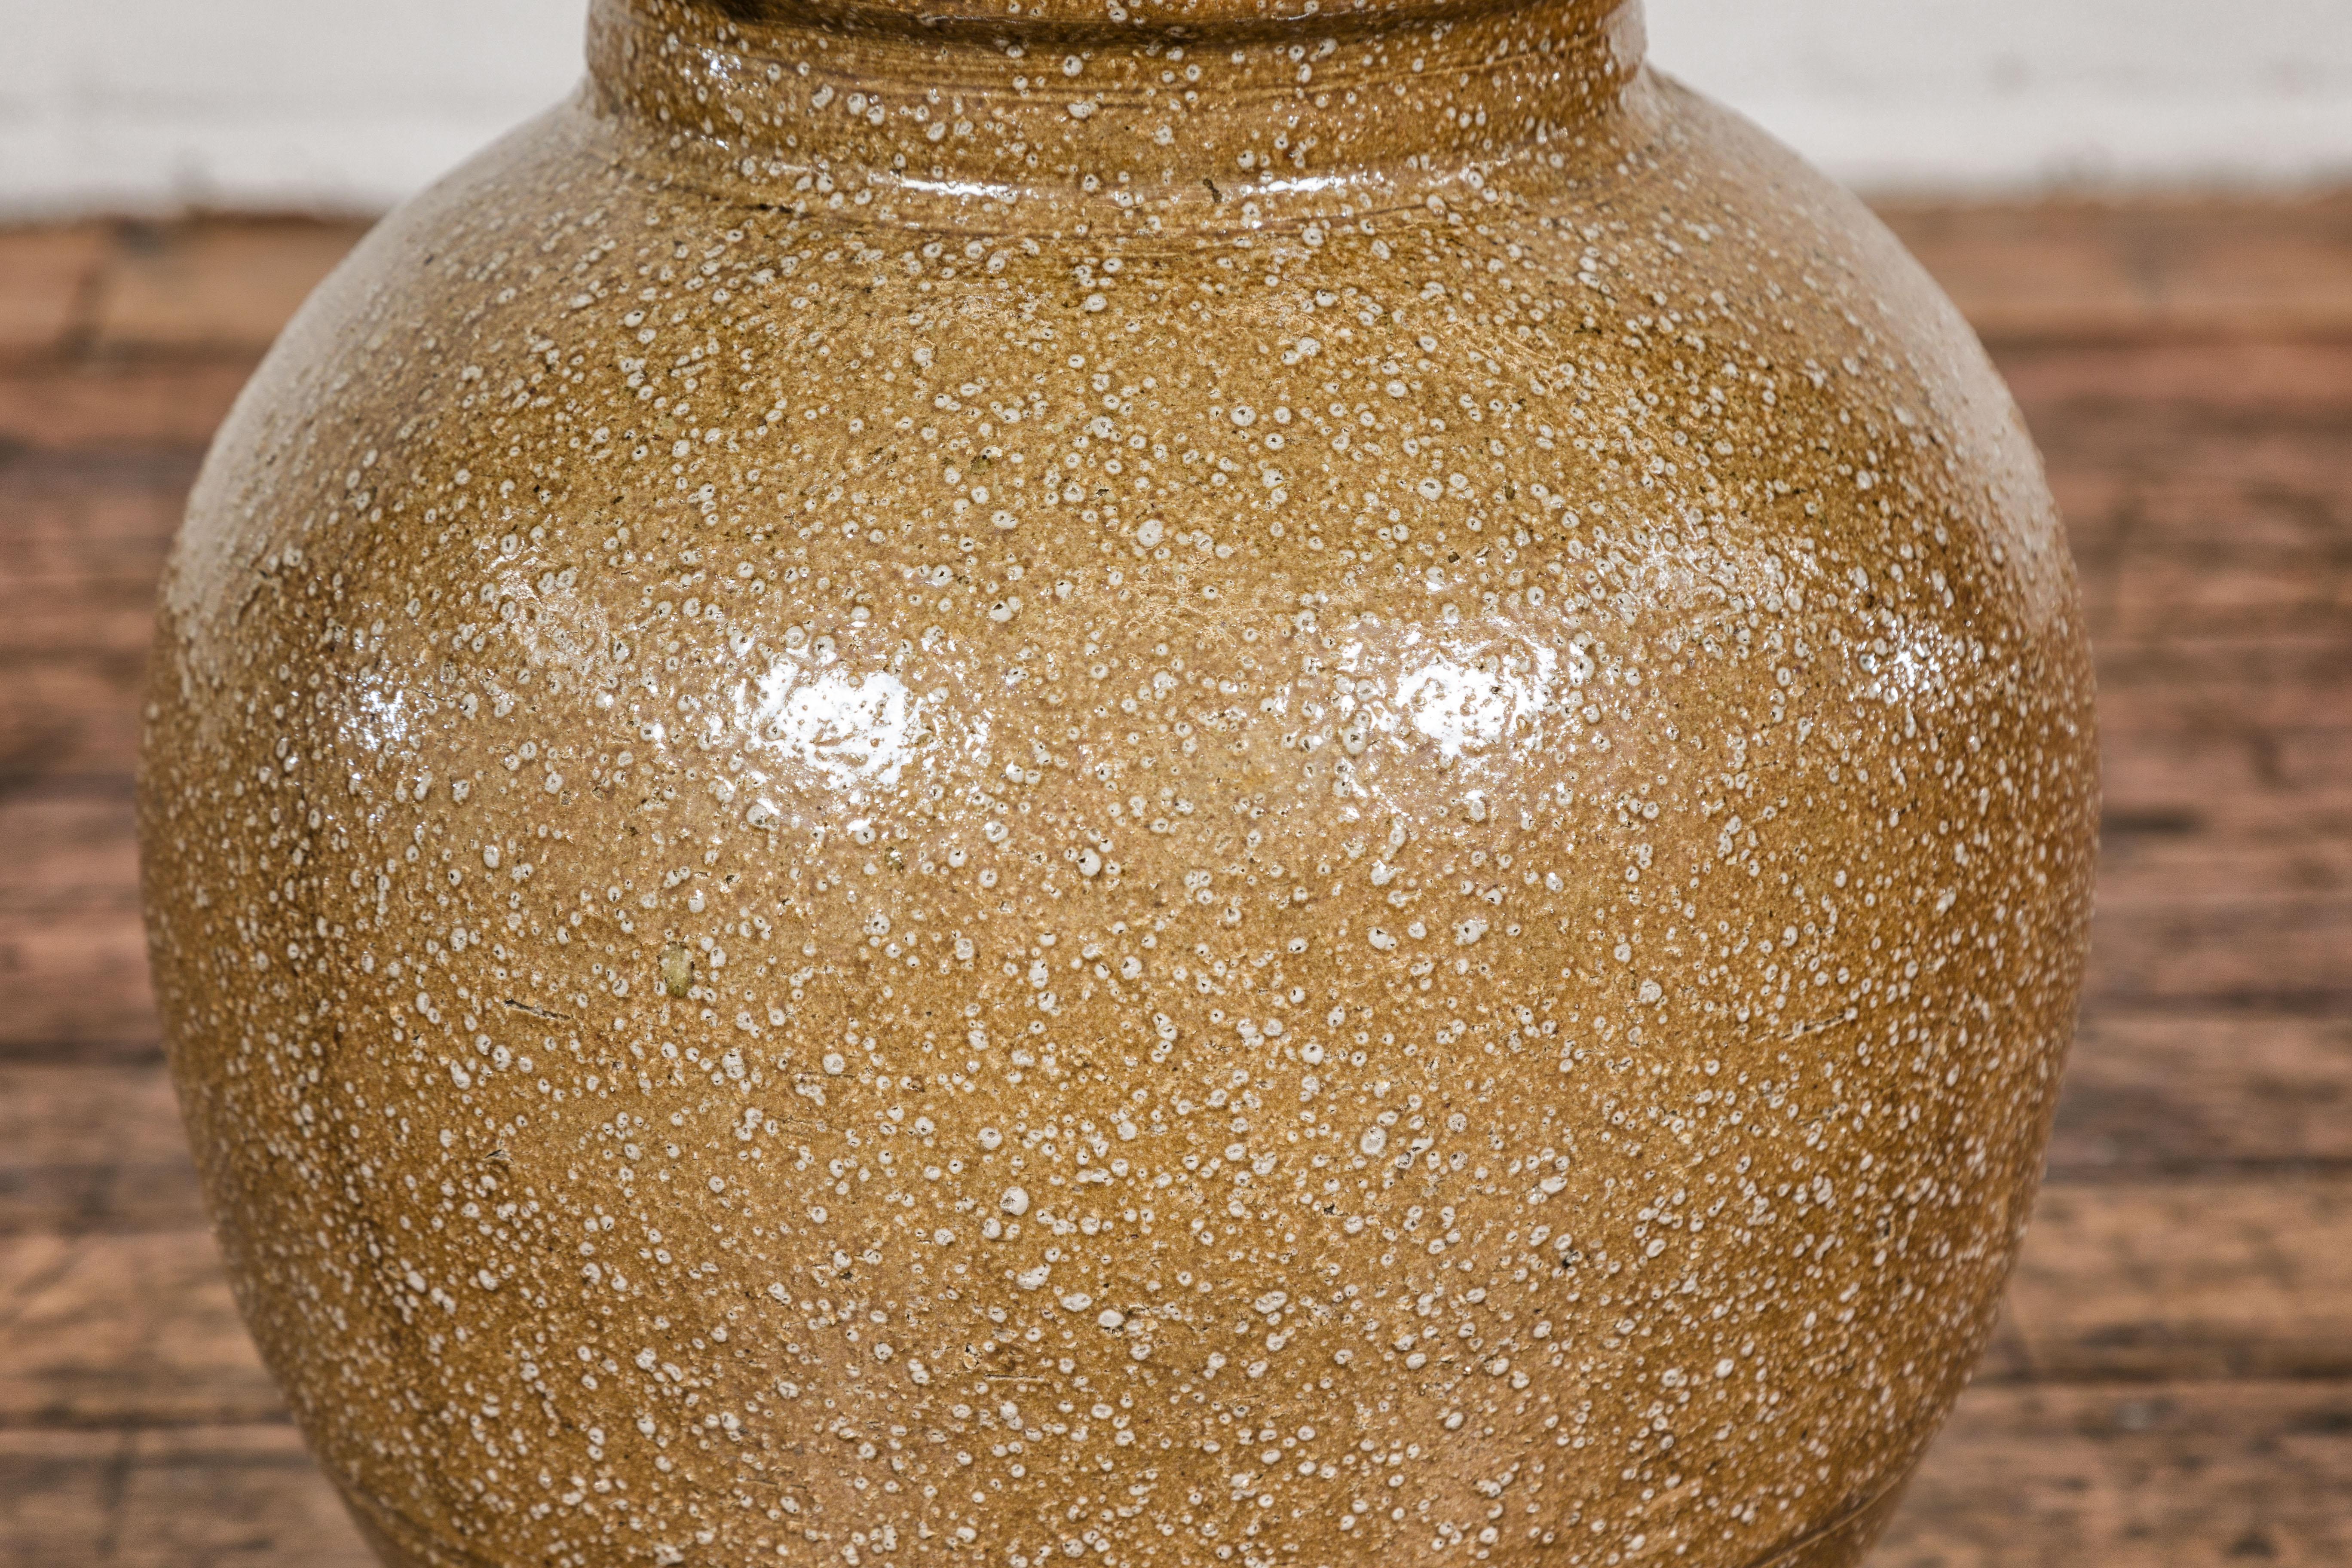 Japanese Taishō Period Two-Tone Sand Glaze Vase with Textured Finish, circa 1900 In Good Condition For Sale In Yonkers, NY